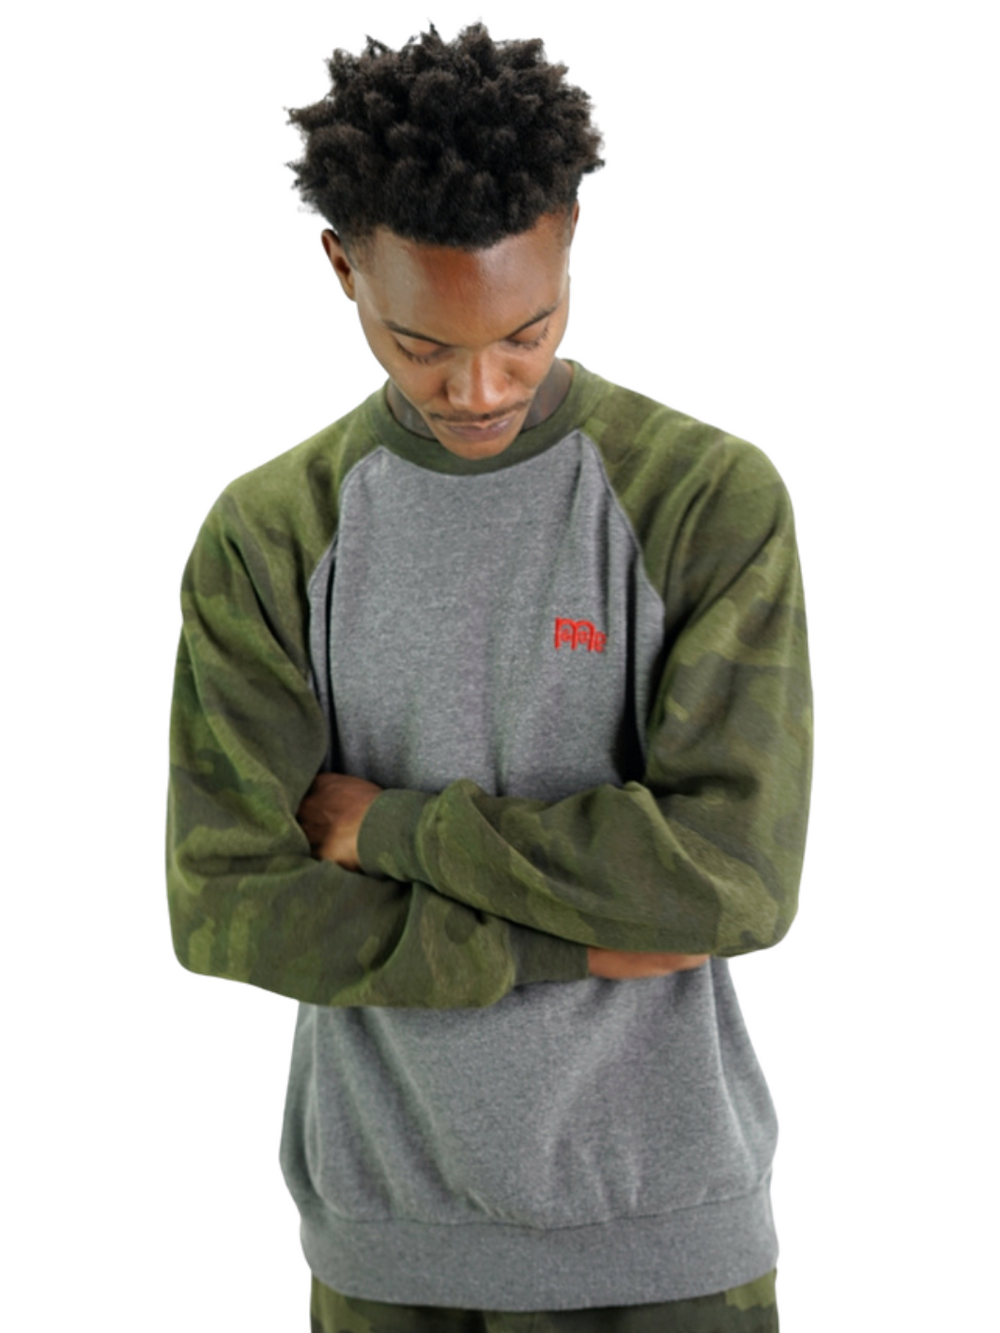 GODinme Crewneck Sweater; luxurious comfort, Grey with Green Camouflage raglan sleeves and embroidered Red GODinme logo at left chest.